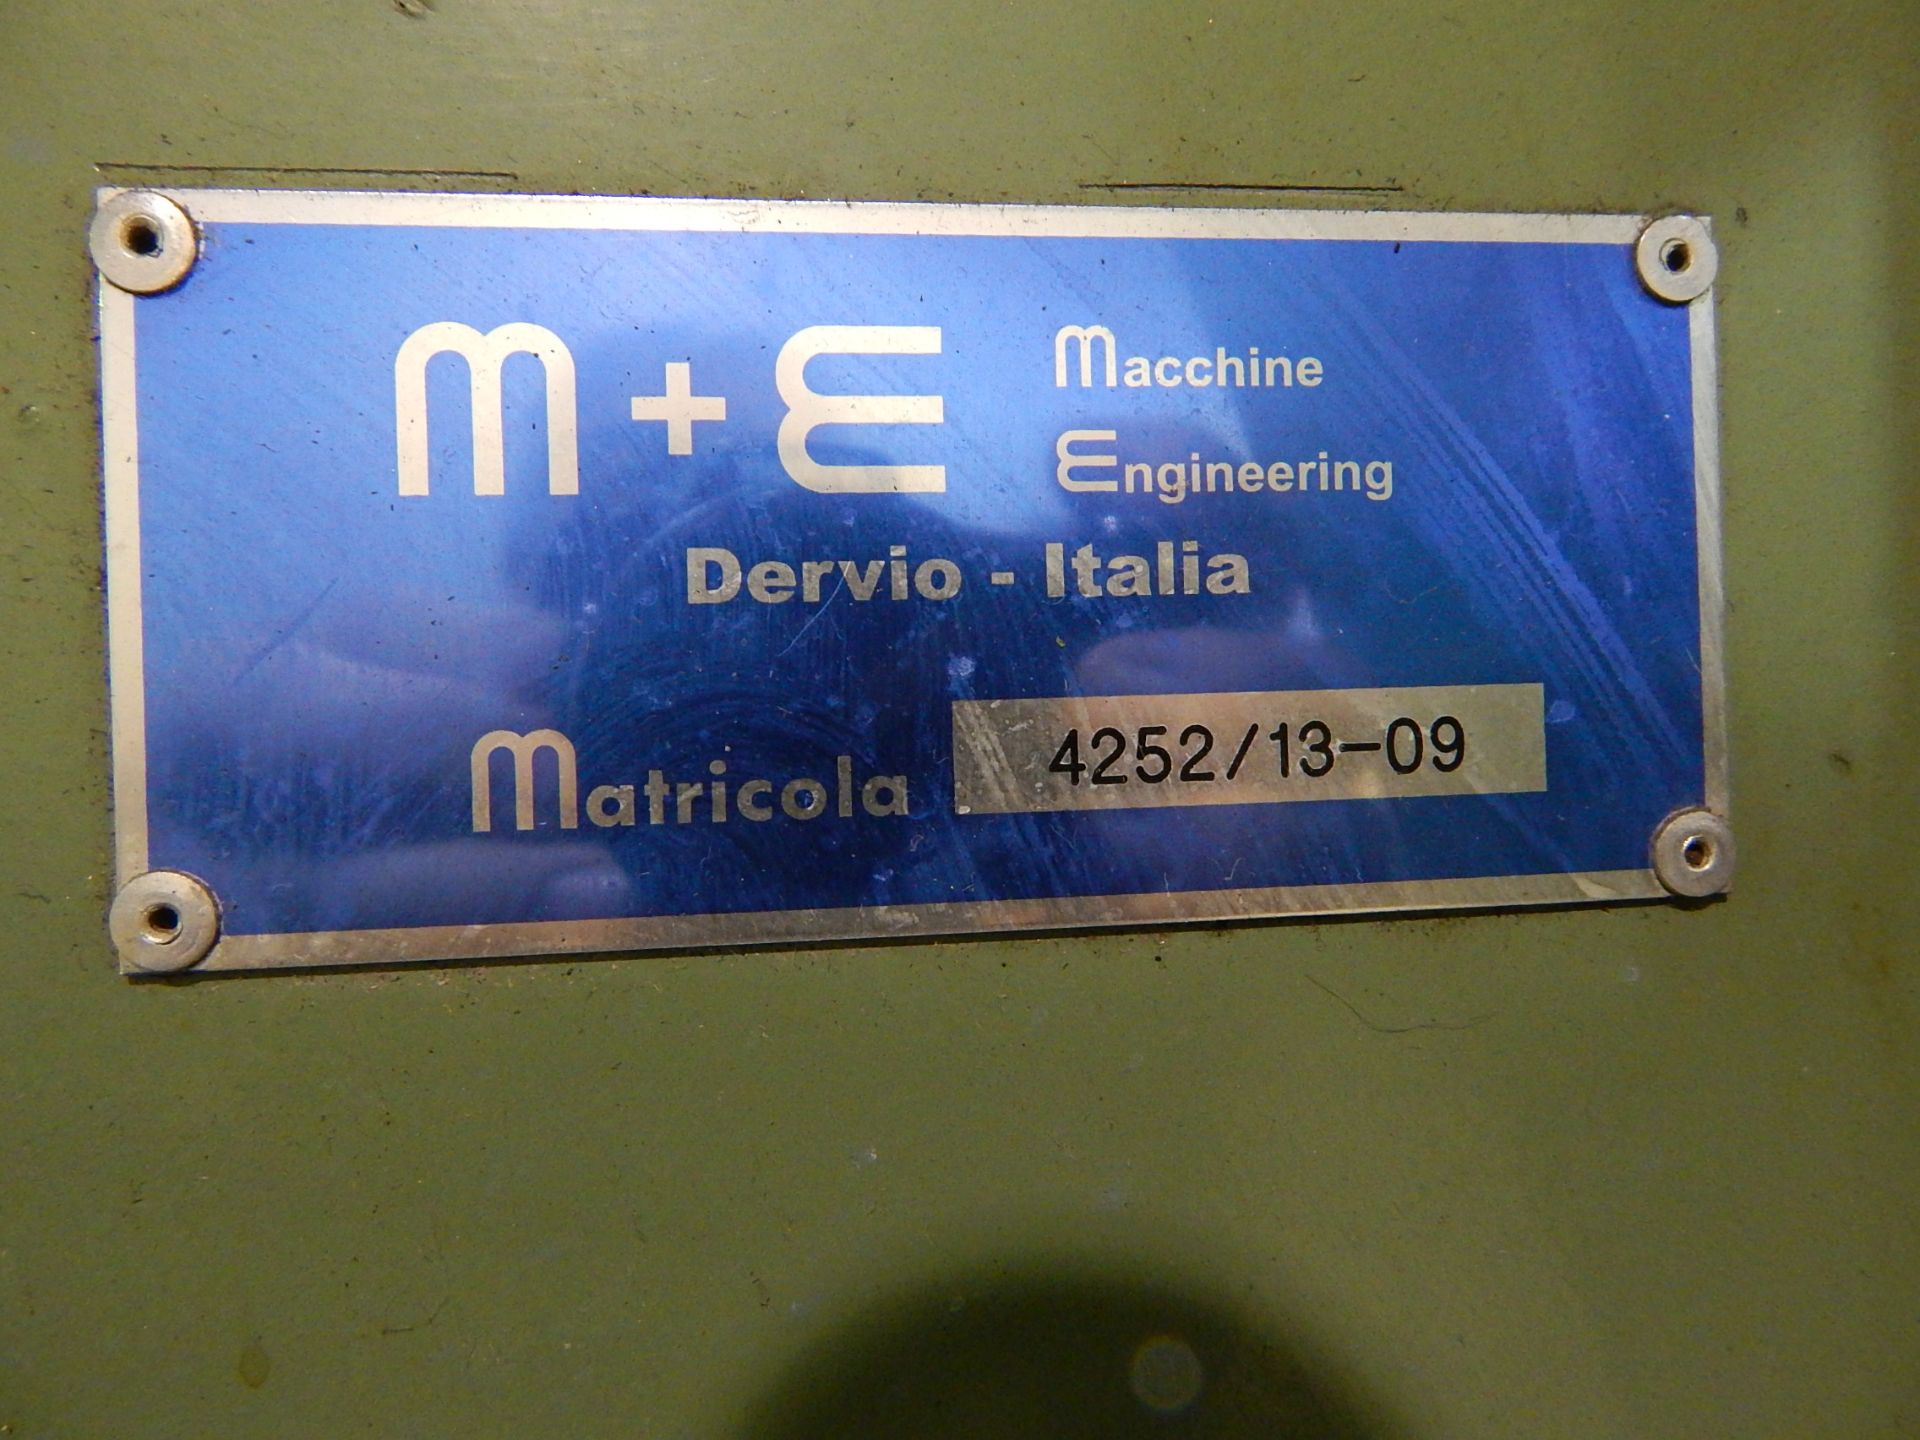 M & E Model NMG 25 Wet Wire Drawing Machine, SN 4252-13-09 with Integrated Spooler Model, SP 330, - Image 6 of 6